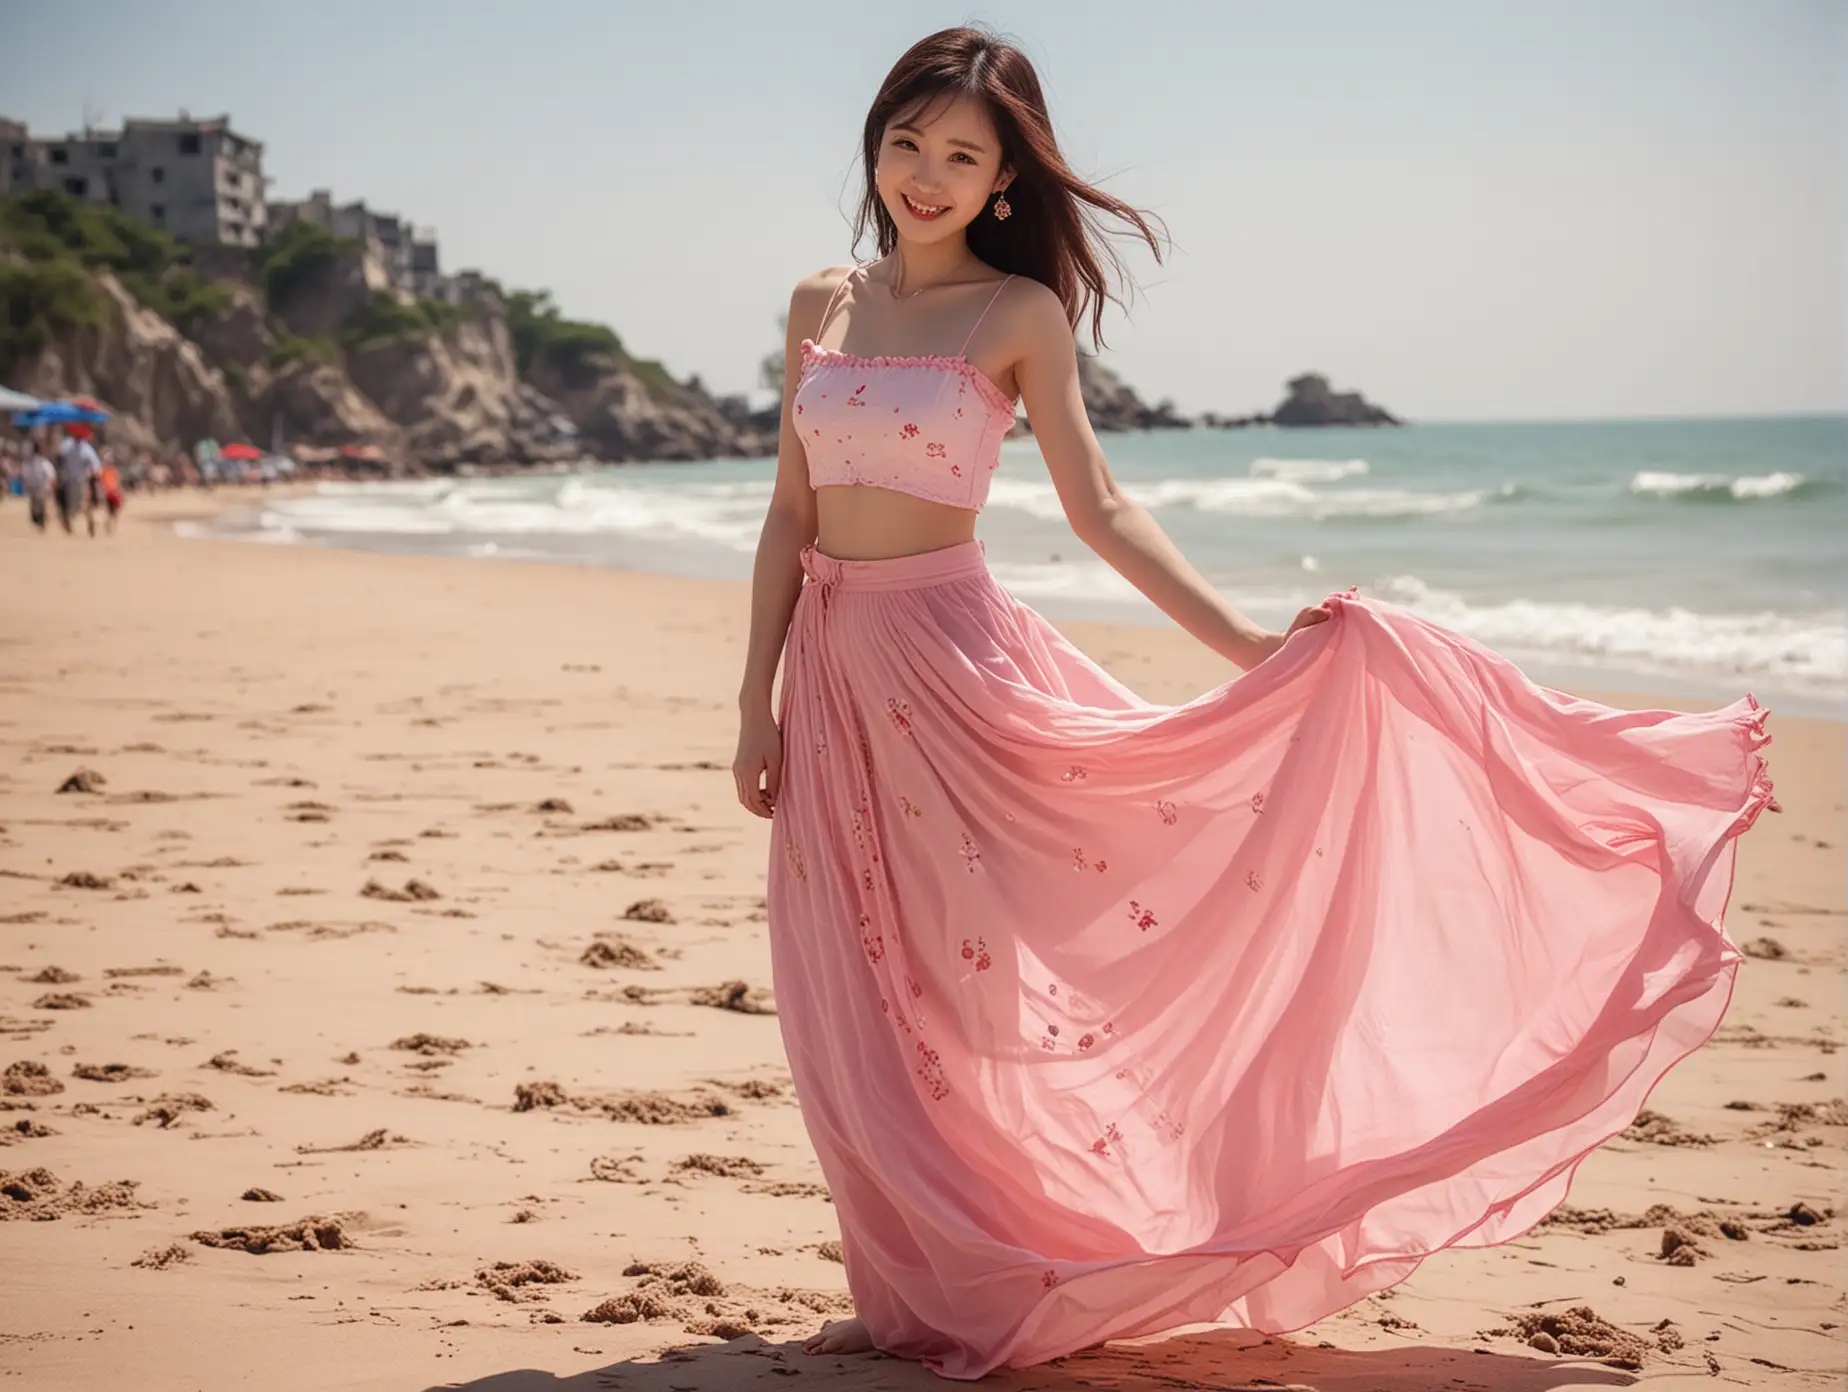 Smiling-Chinese-Girl-in-Pink-Skirt-on-Sunlit-Beach